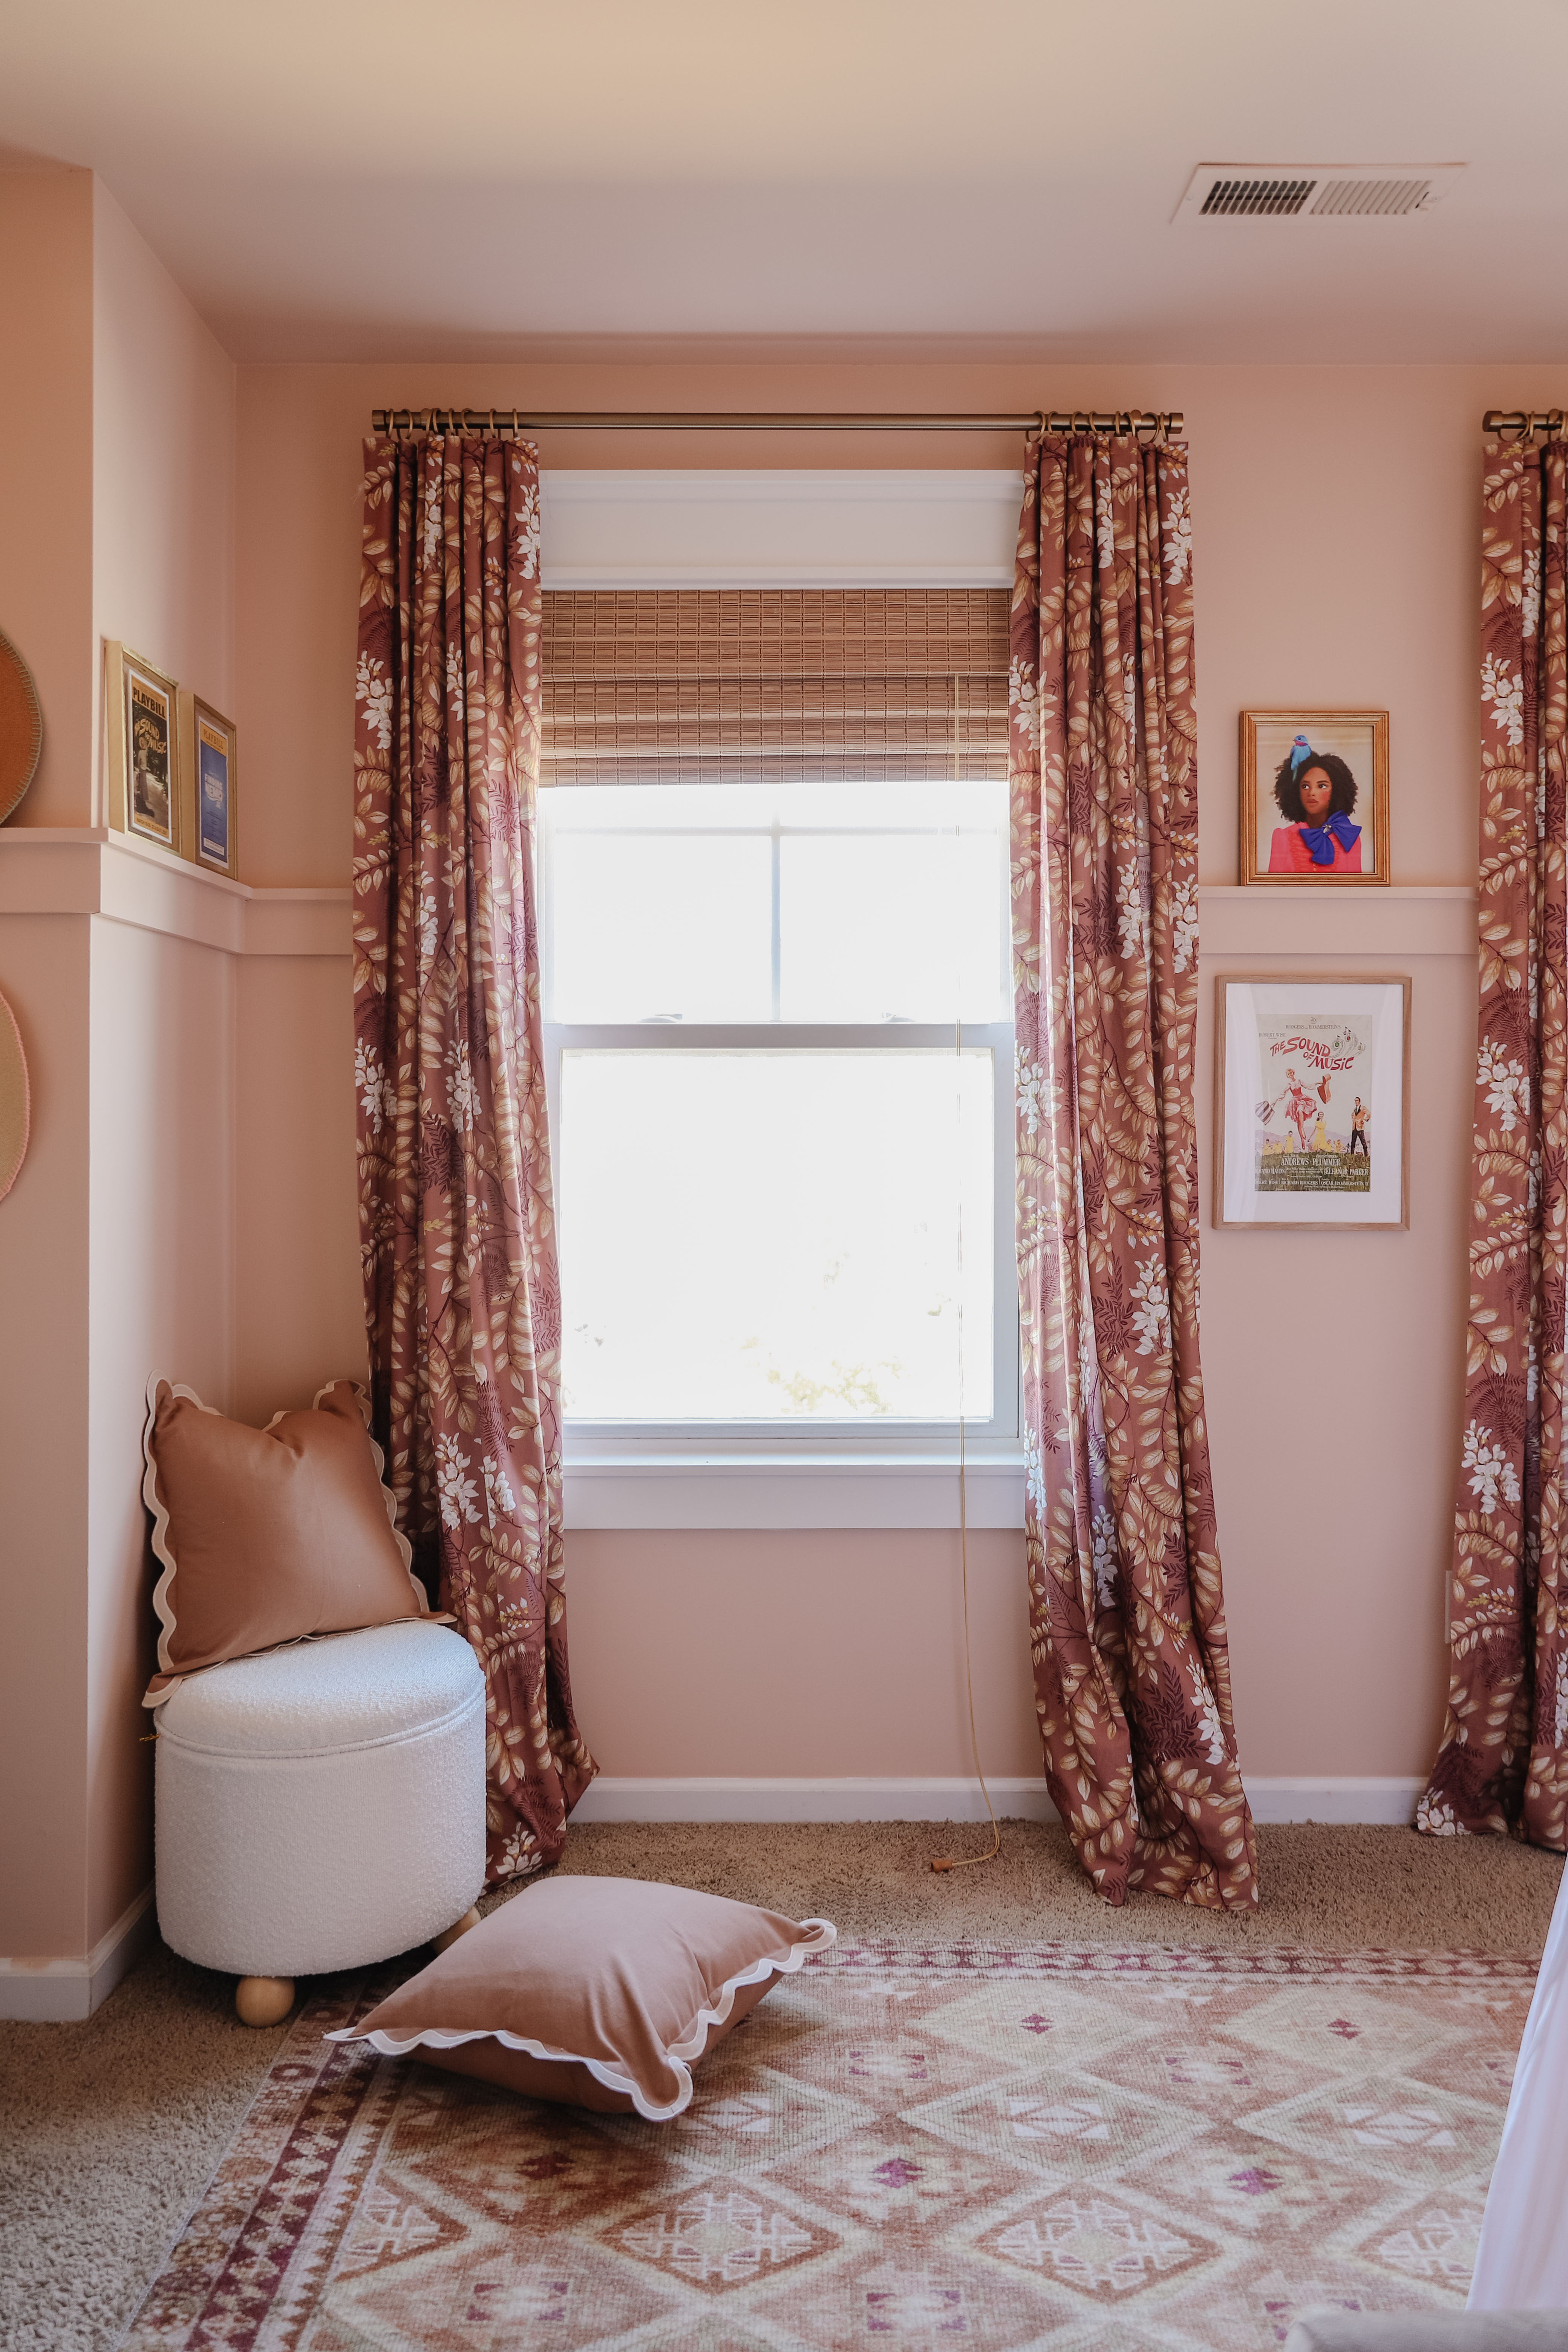 Nadia's Peachy Pink Room Fit for a Preteen